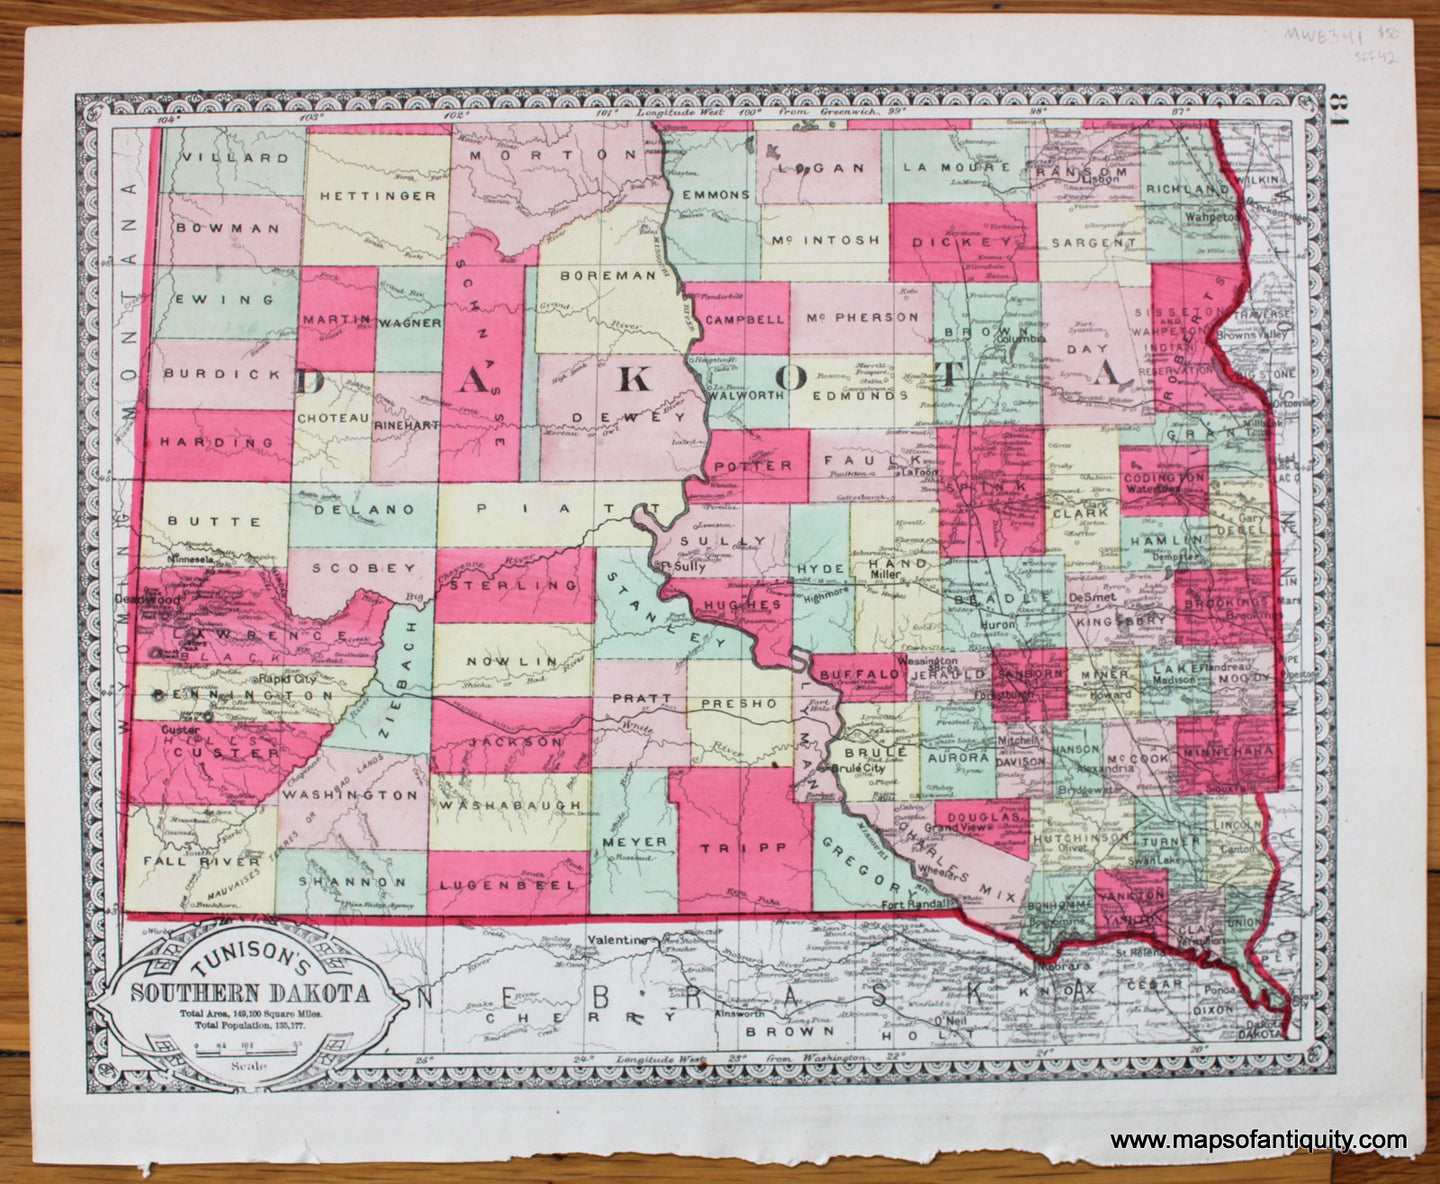 Antique-Printed-Color-Map-Tunison's-Southern-Dakota-verso:-Tunison's-Northern-Dakota-******-United-States-Midwest-1885-Tunison-Maps-Of-Antiquity